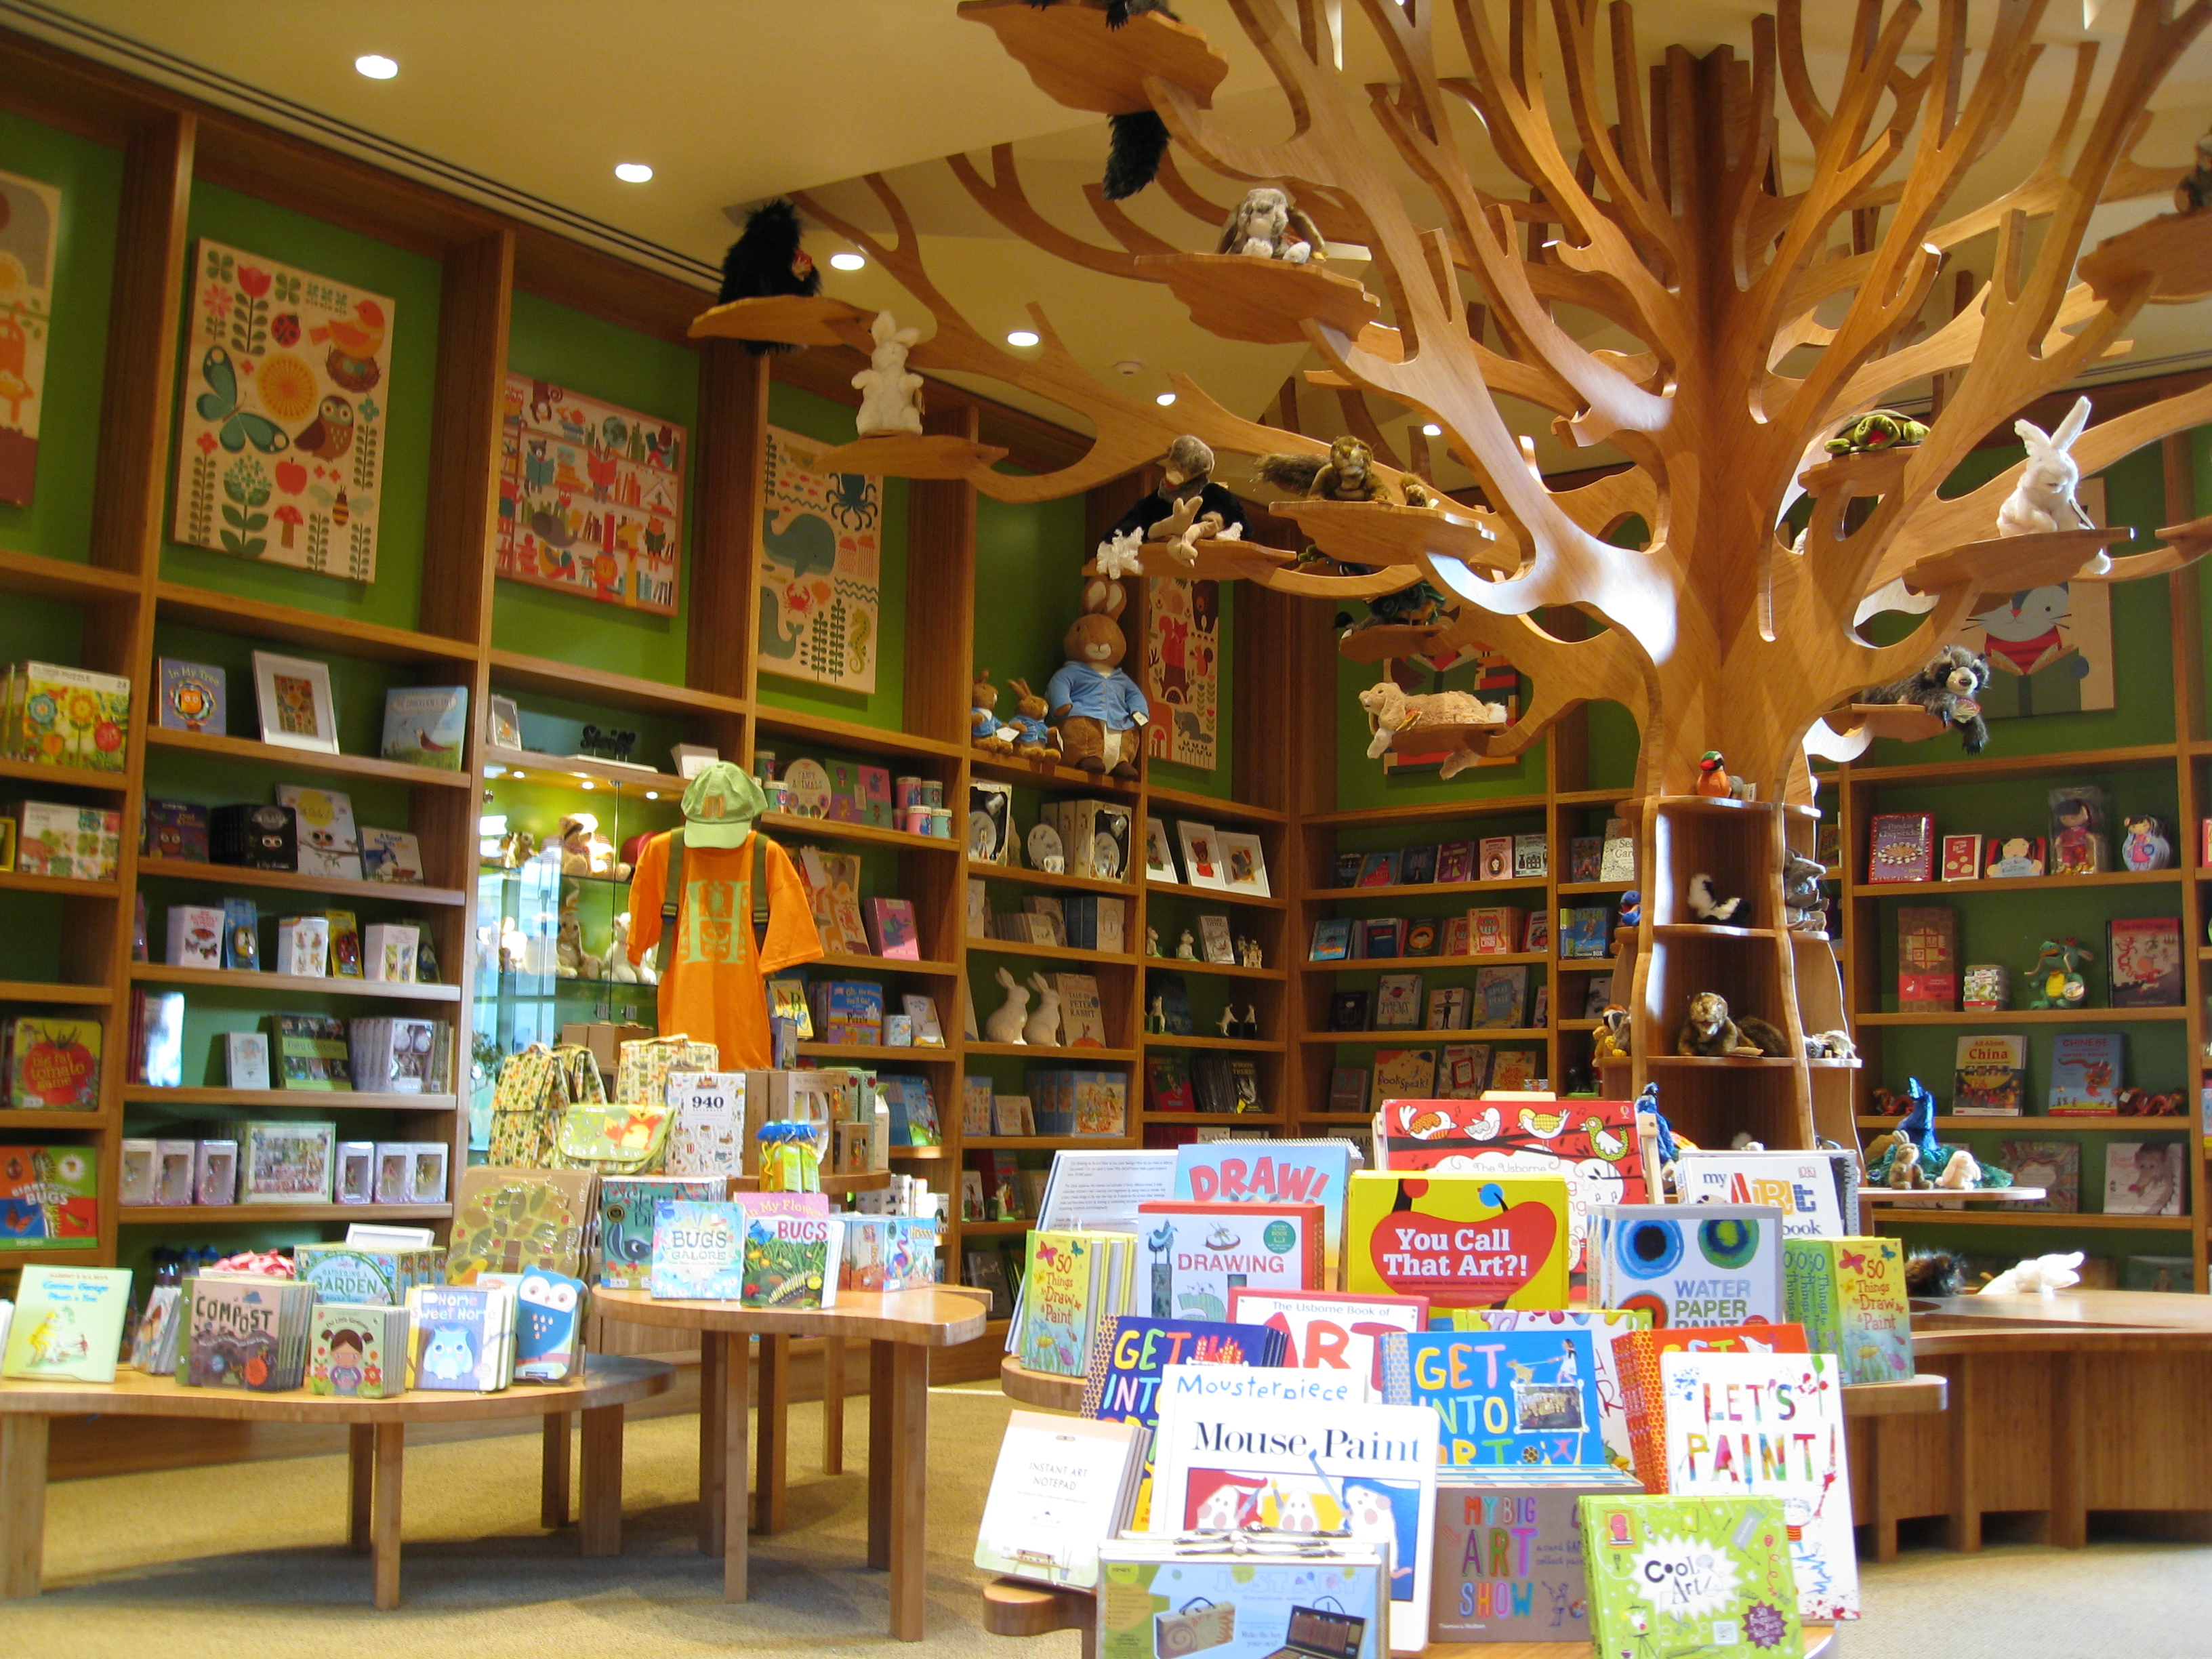 The children's section is magical. The rest isn't too shabby either.